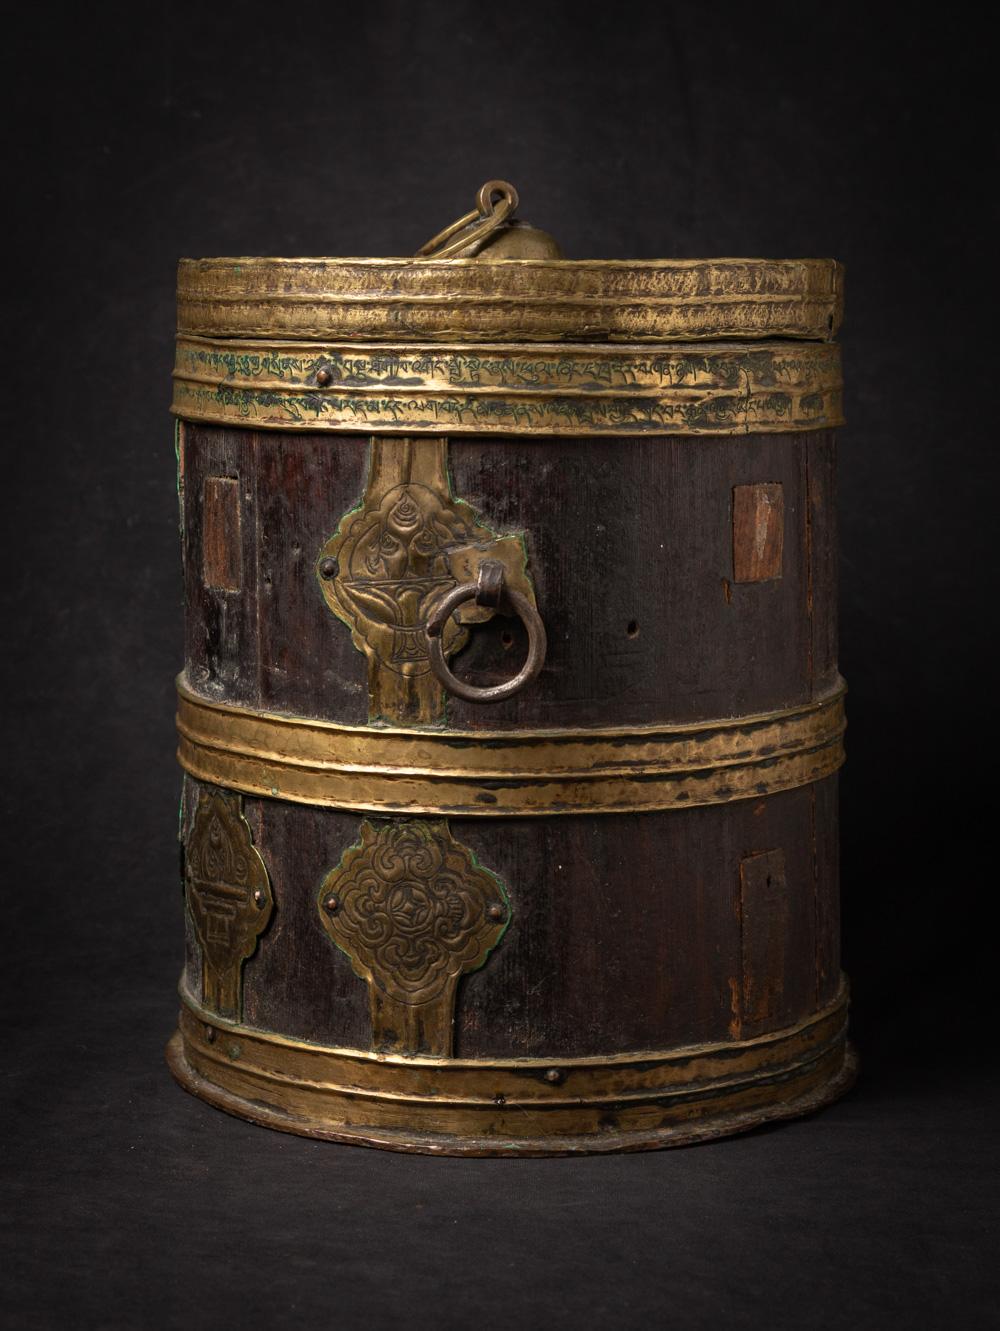 Antique Tibetan Yak Butter container
Material : wood
35,5 cm high
29,5 diameter
With fire gilded copper strip with Tibetan inscriptions
19th century
Weight: 5 kgs
Originating from Tibet
Nr: 3824